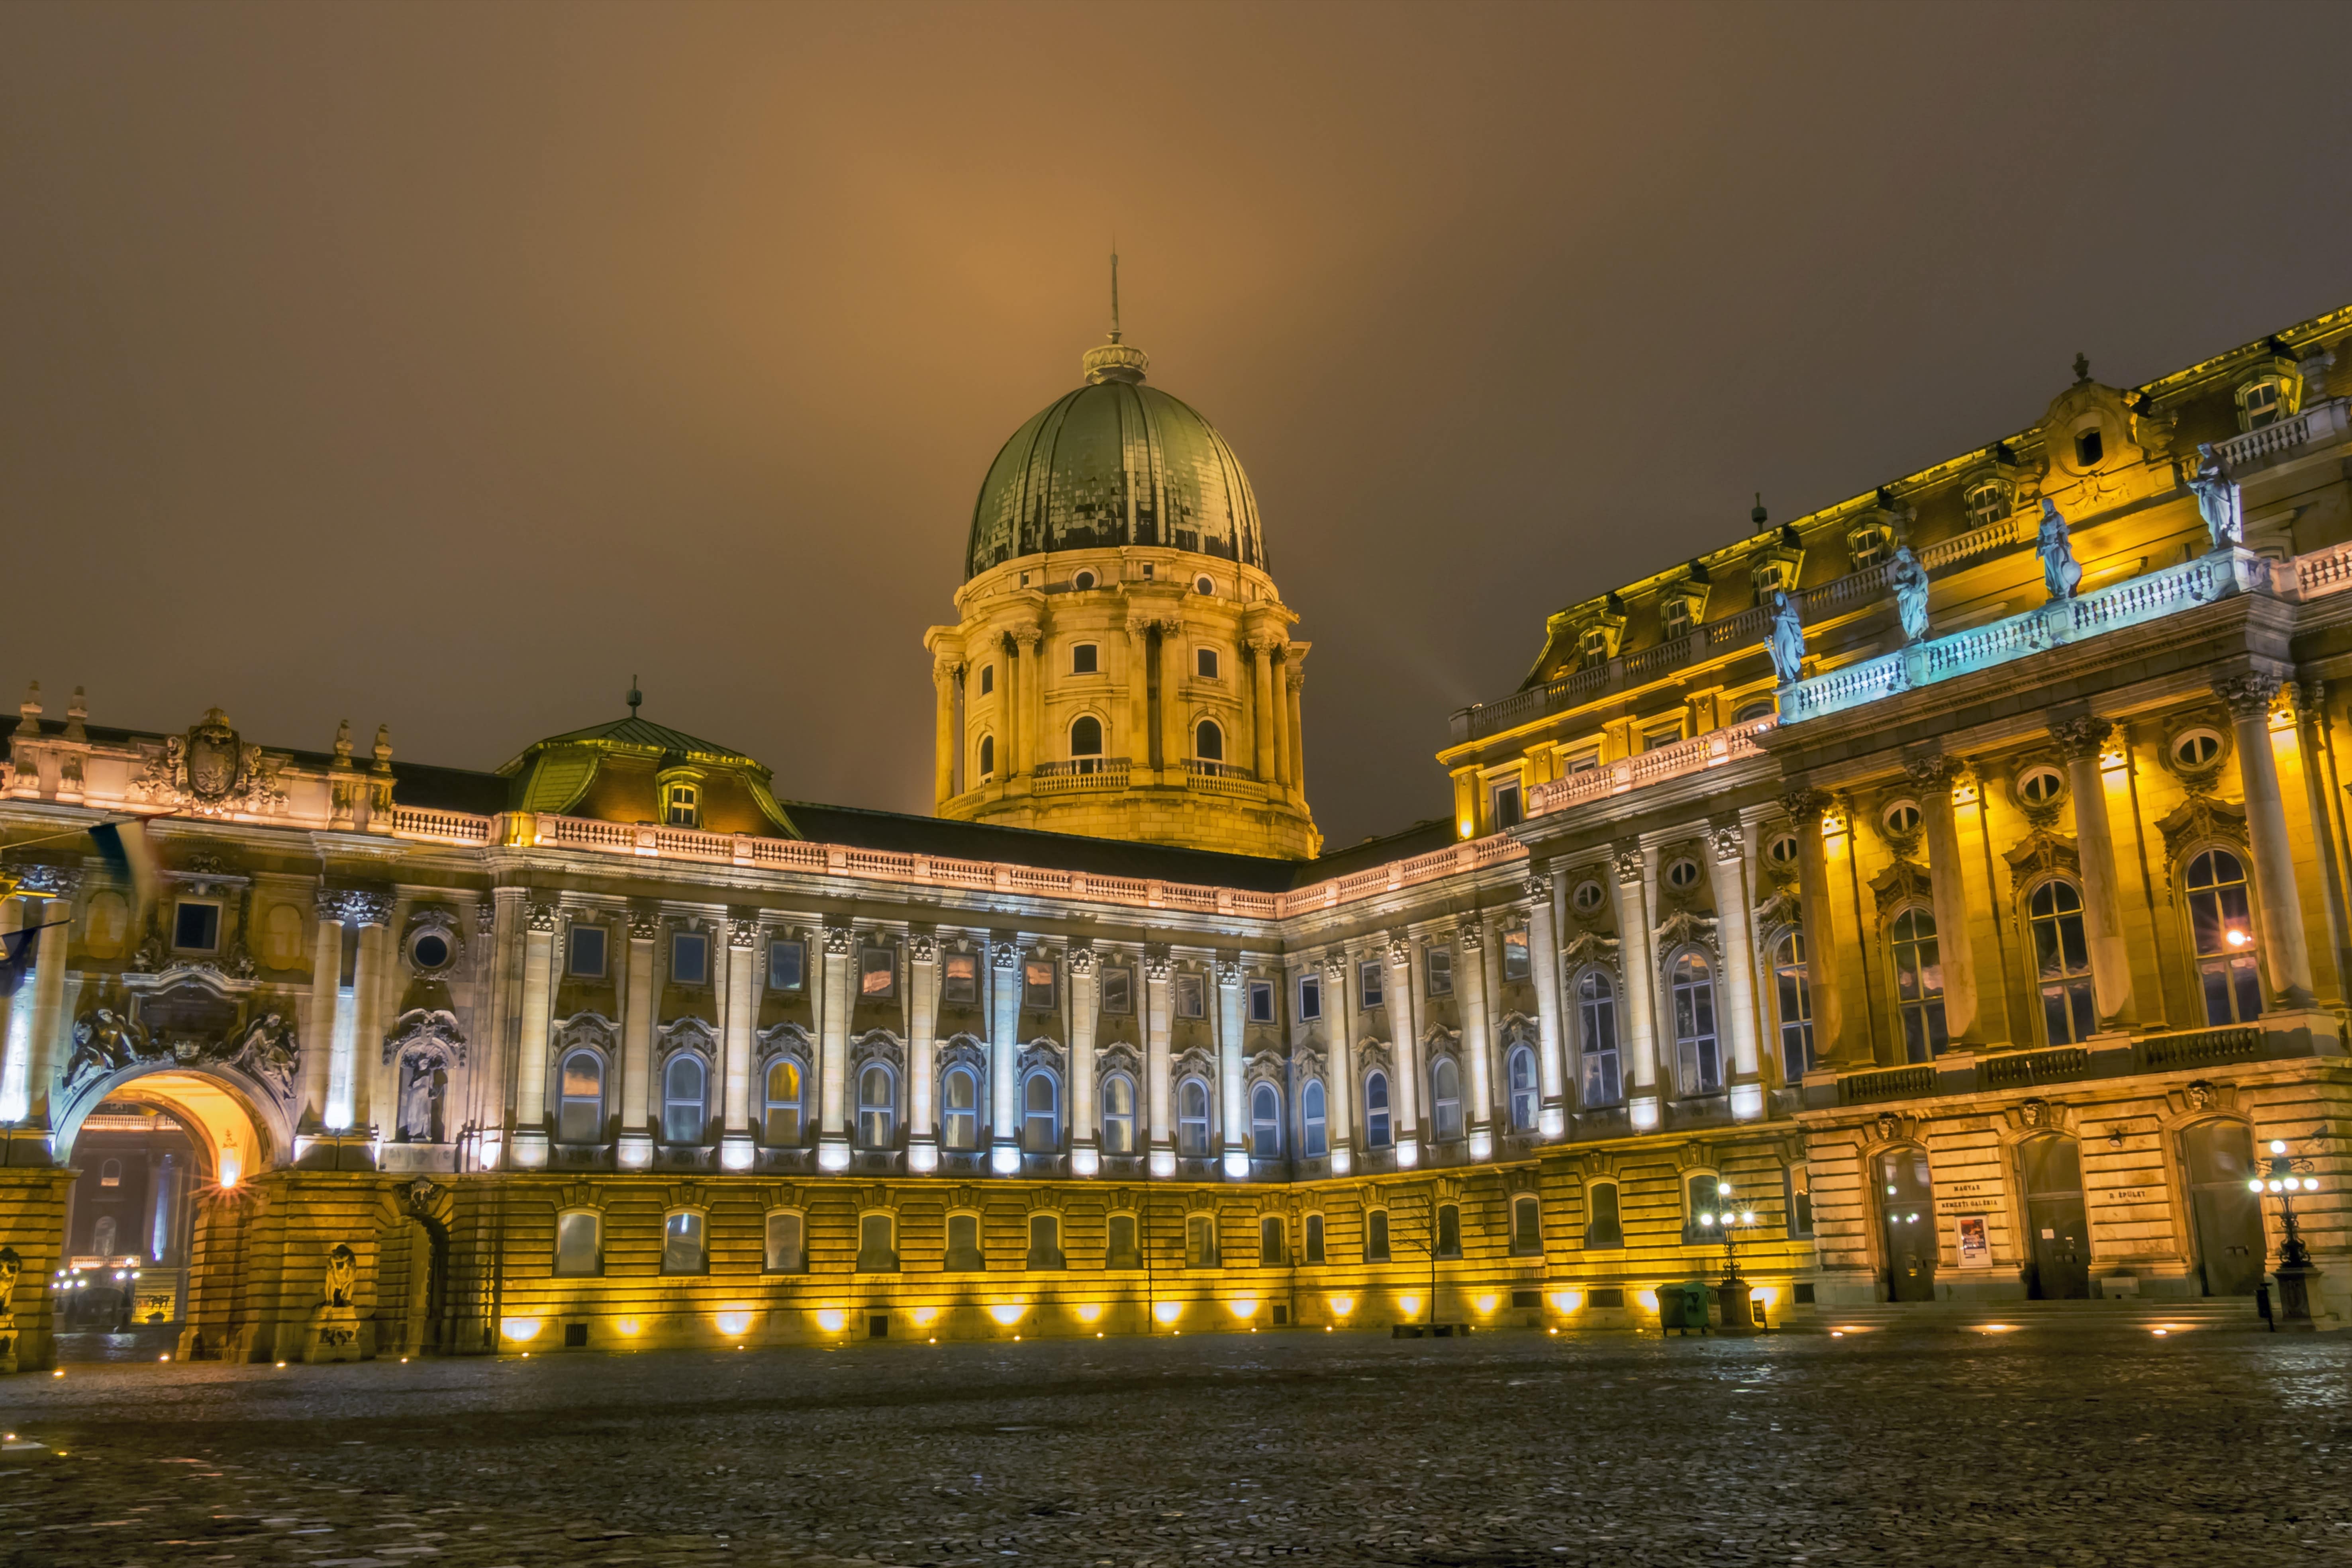 Budapest’s Buda Castle is a real stunner, especially at night